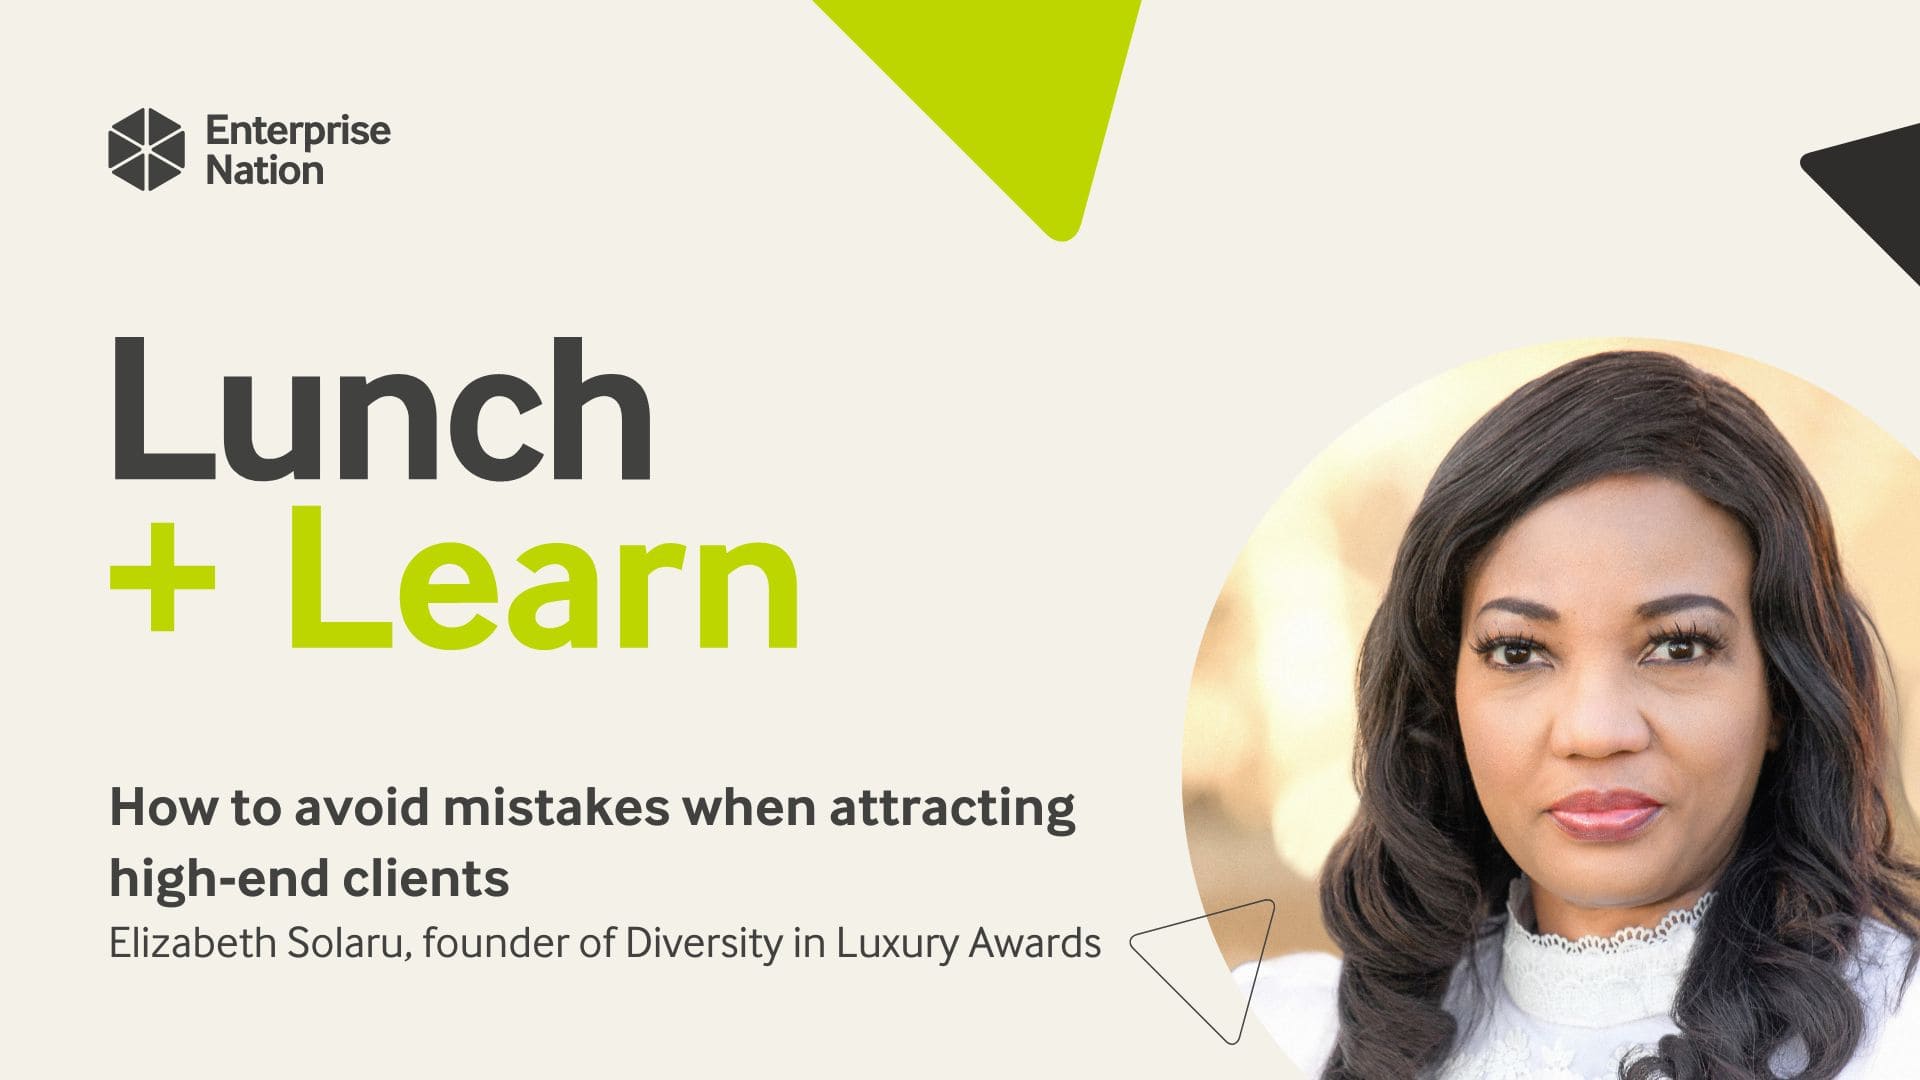 Lunch and Learn: How to avoid mistakes when attracting high-end clients